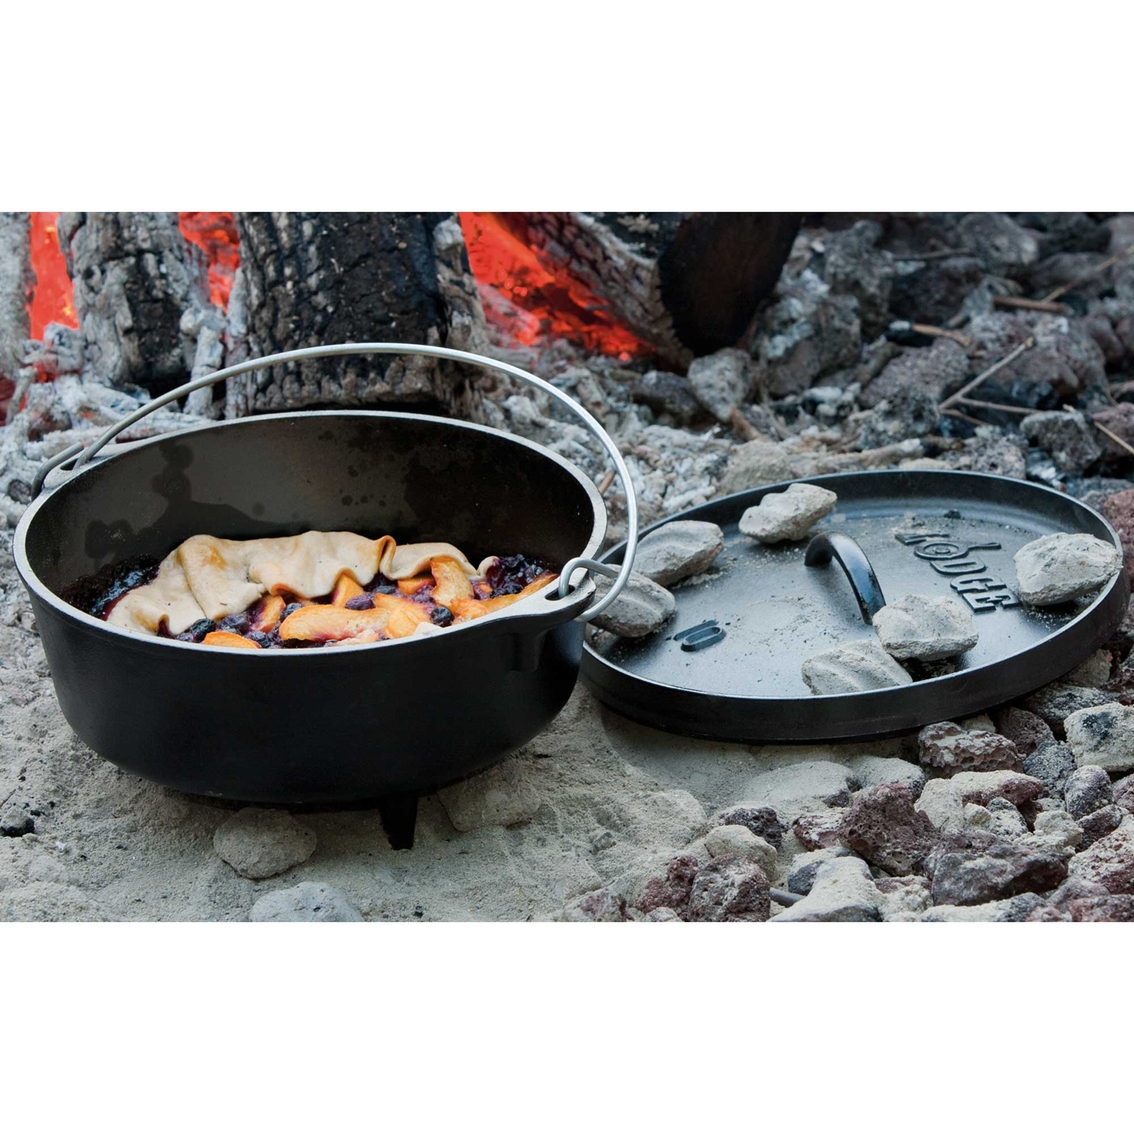 Lodge Cast Iron 10 in. Camp Dutch Oven - Image 3 of 4